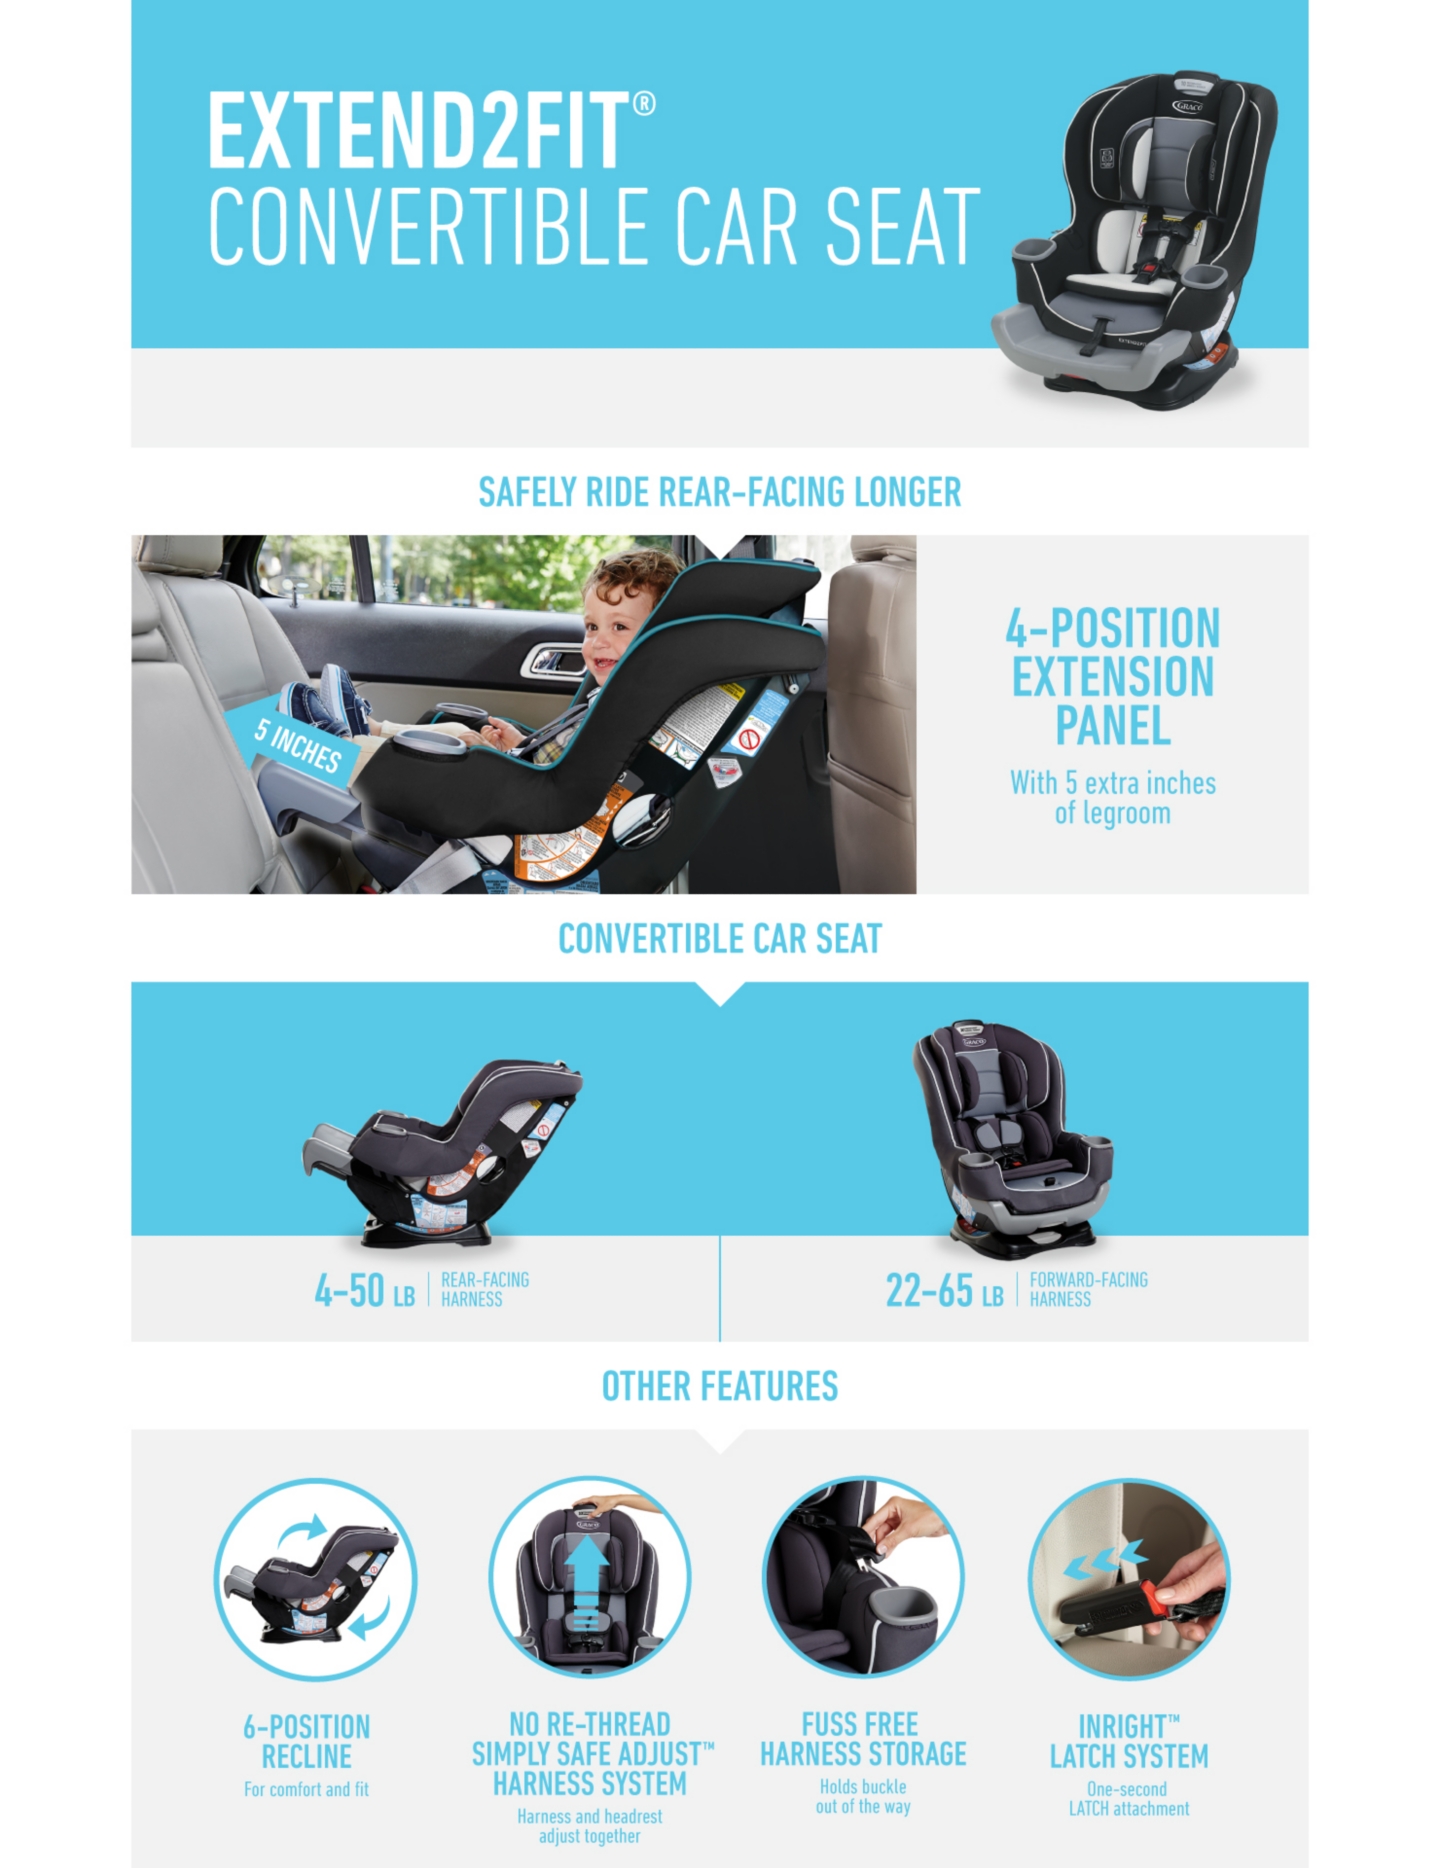 Extend2Fit® Convertible Car Seat | gracobaby.com